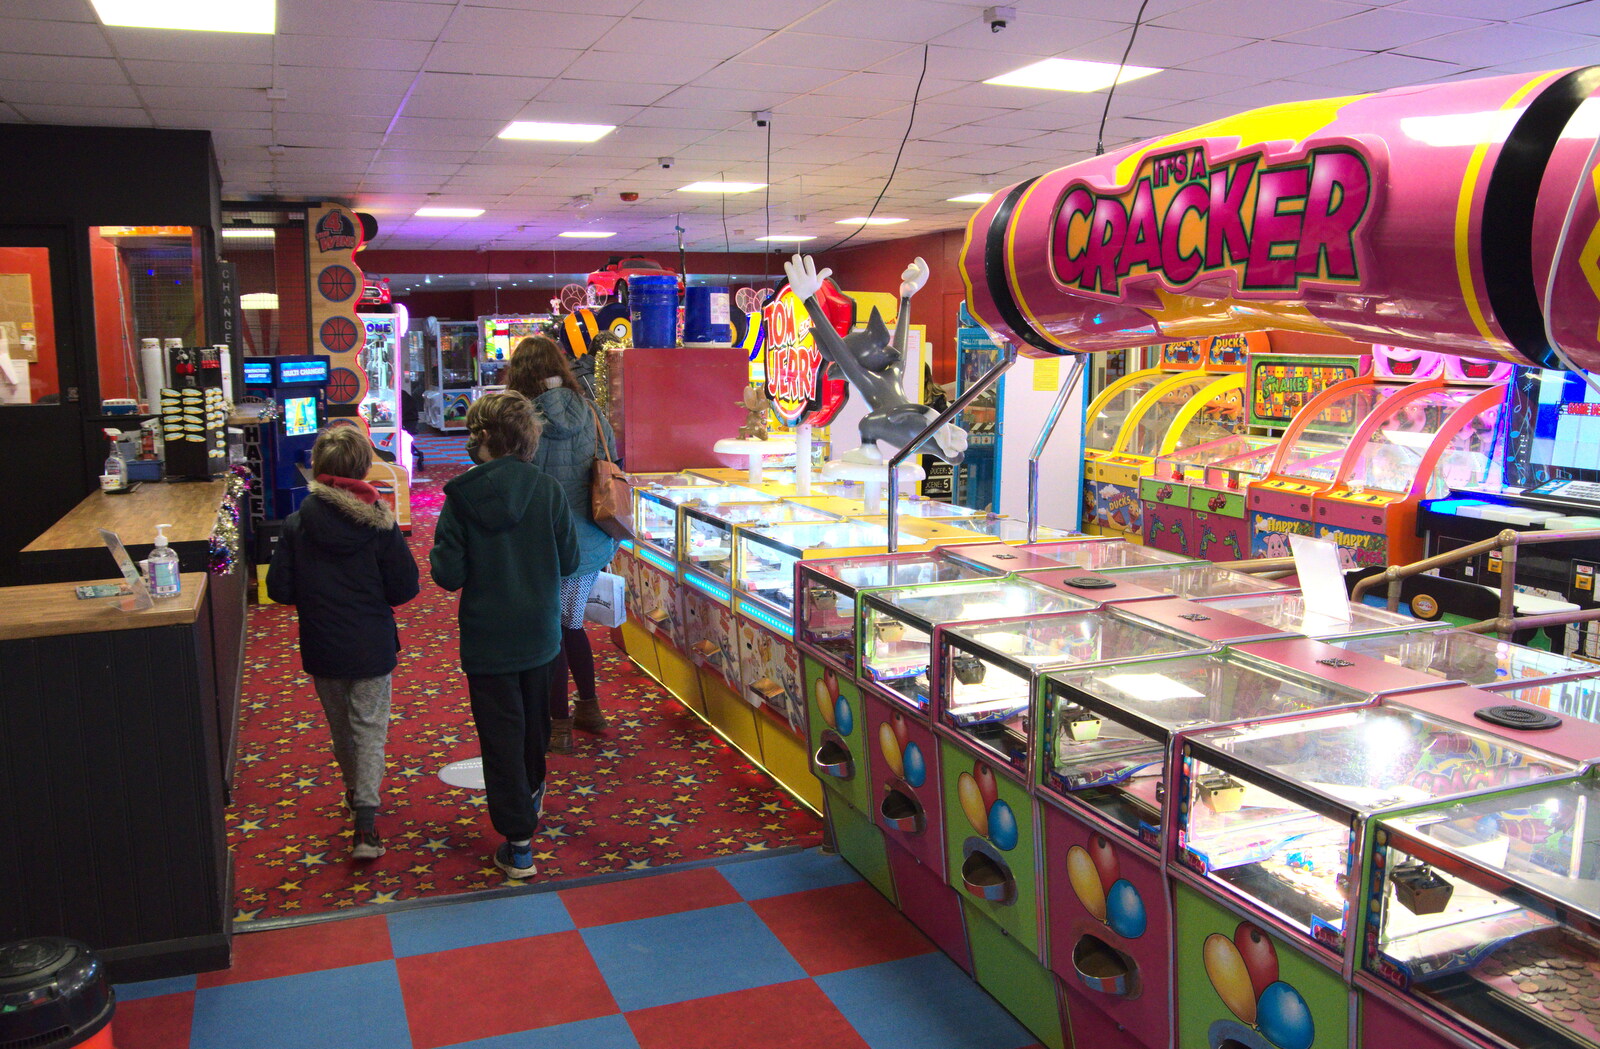 We leave the amusement arcade from A Return to the Beach, Southwold, Suffolk - 20th December 2020